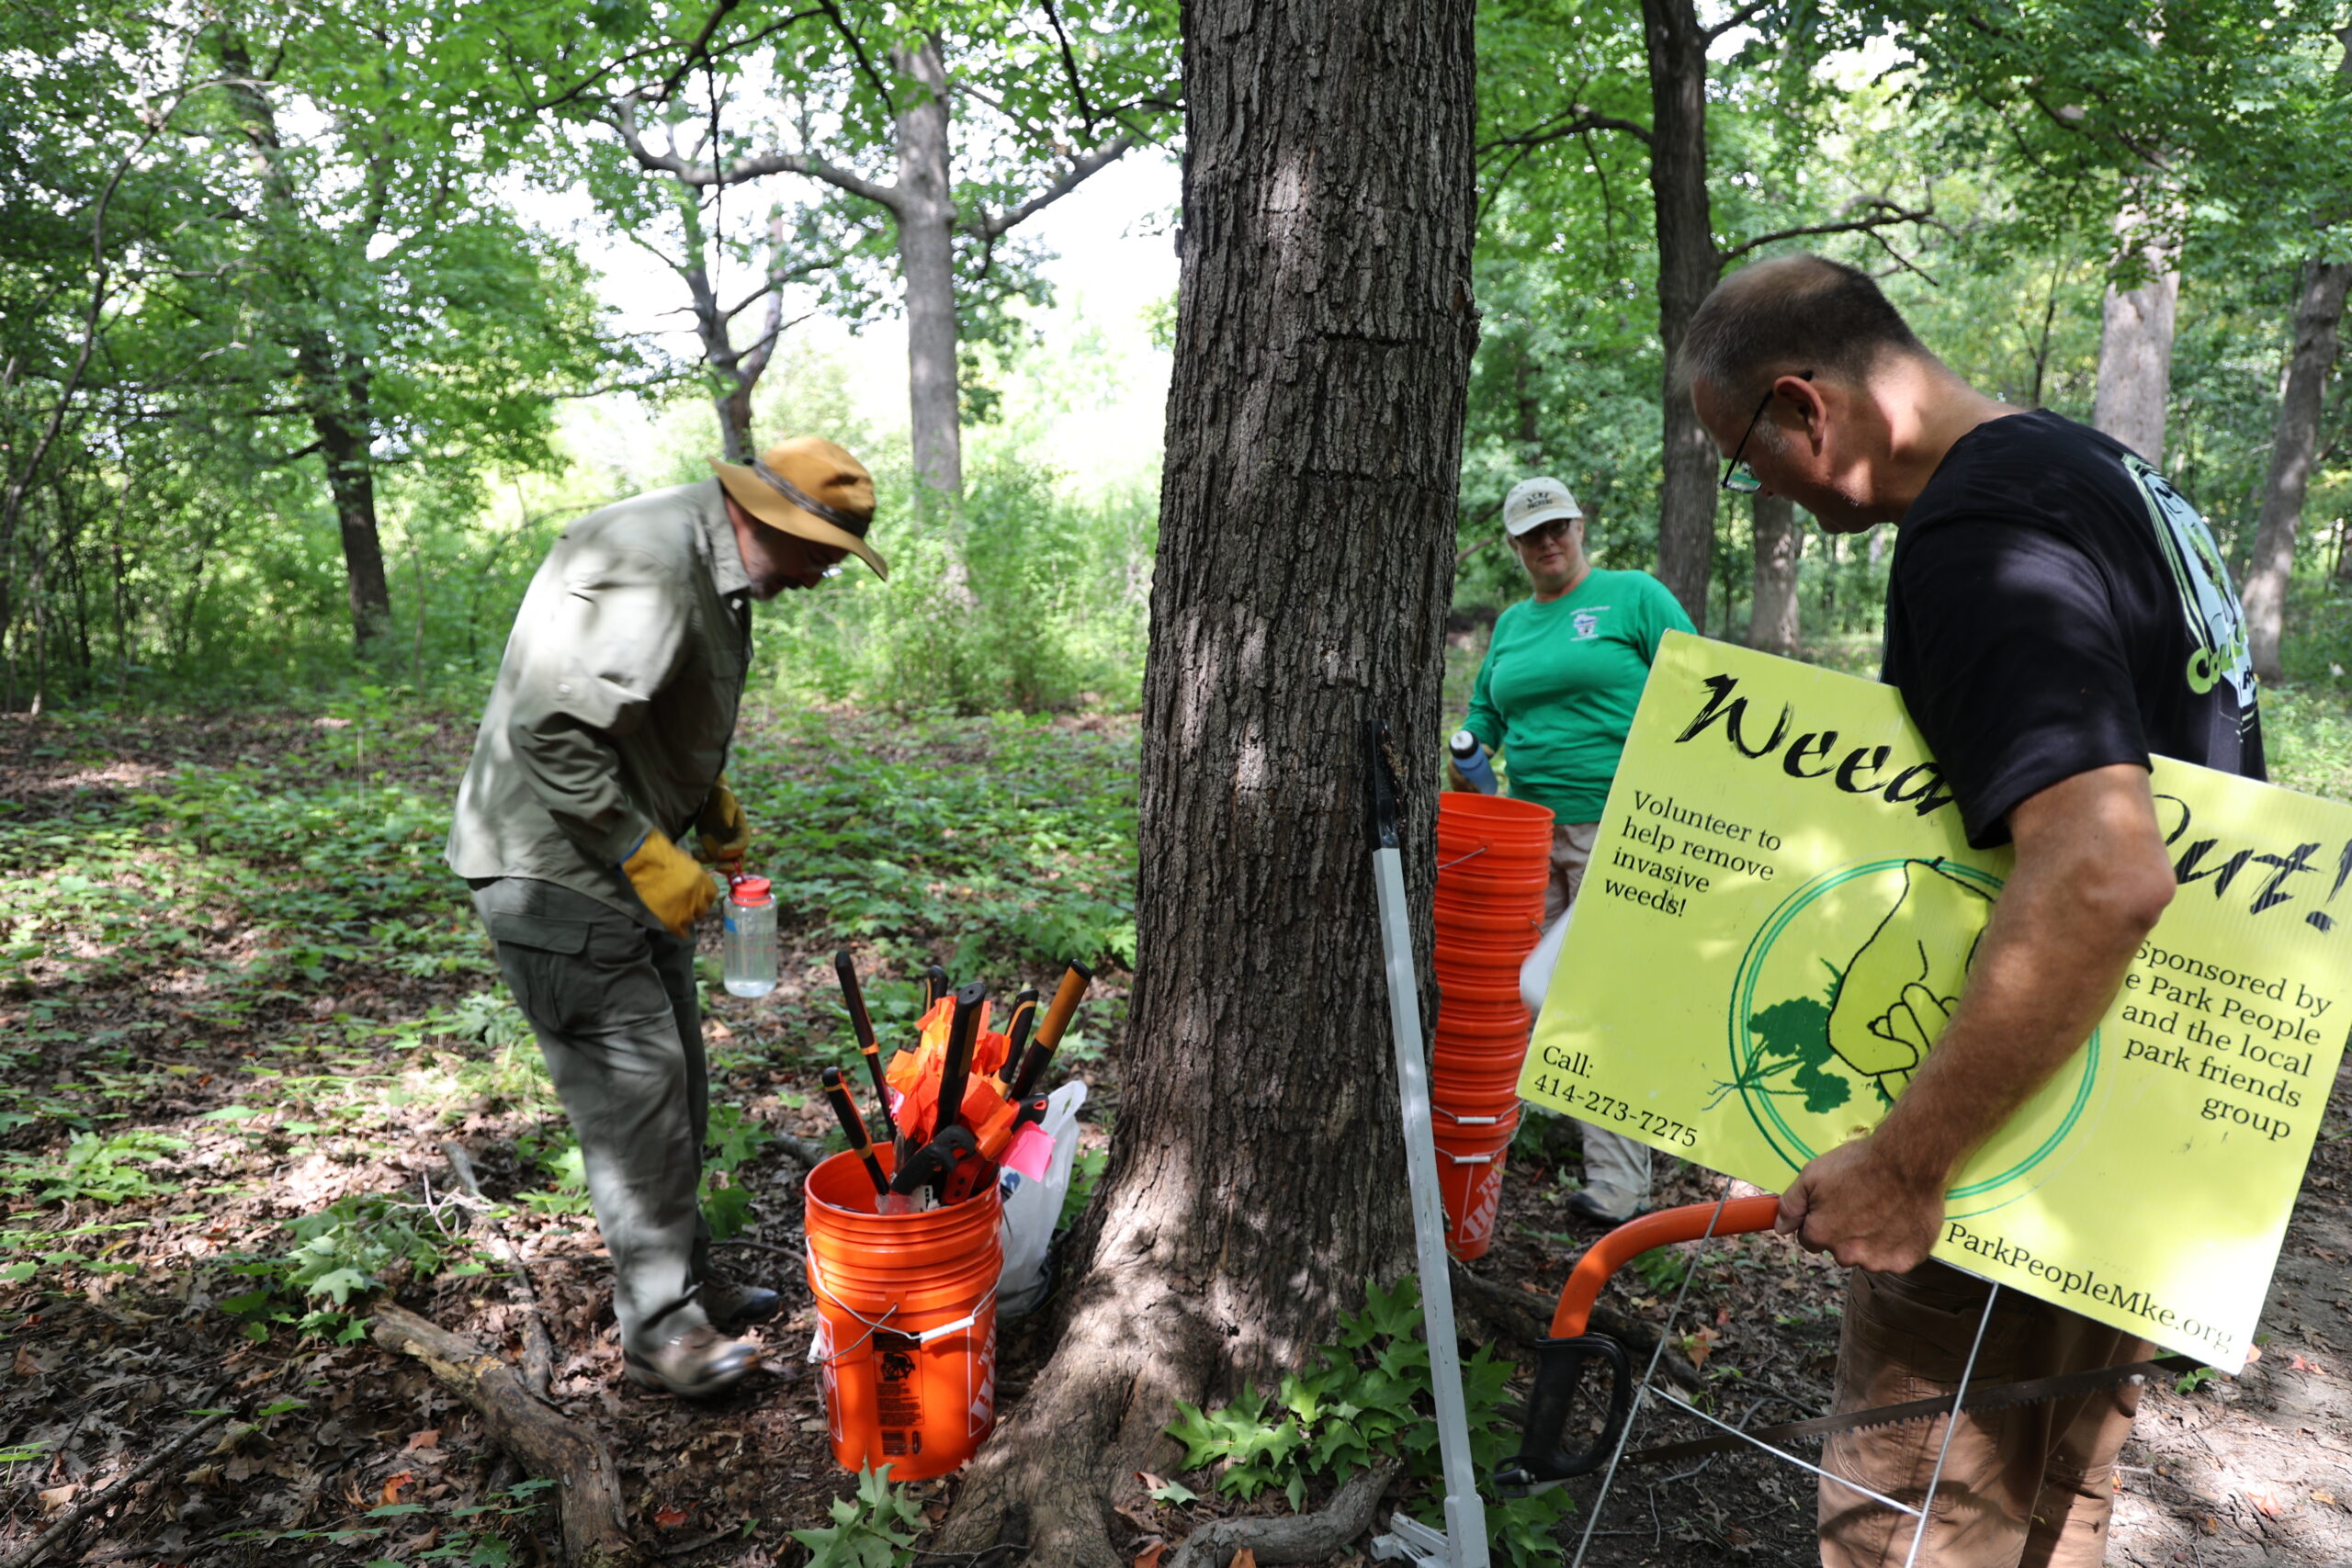 David and Lynn Budde and Jonathan Piel (left to right) set out buckets, loppers and other supplies for a buckthorn removal event organized by the Friends of County Grounds Park volunteer group in a forested area called Sanctuary Woods in Wauwatosa.